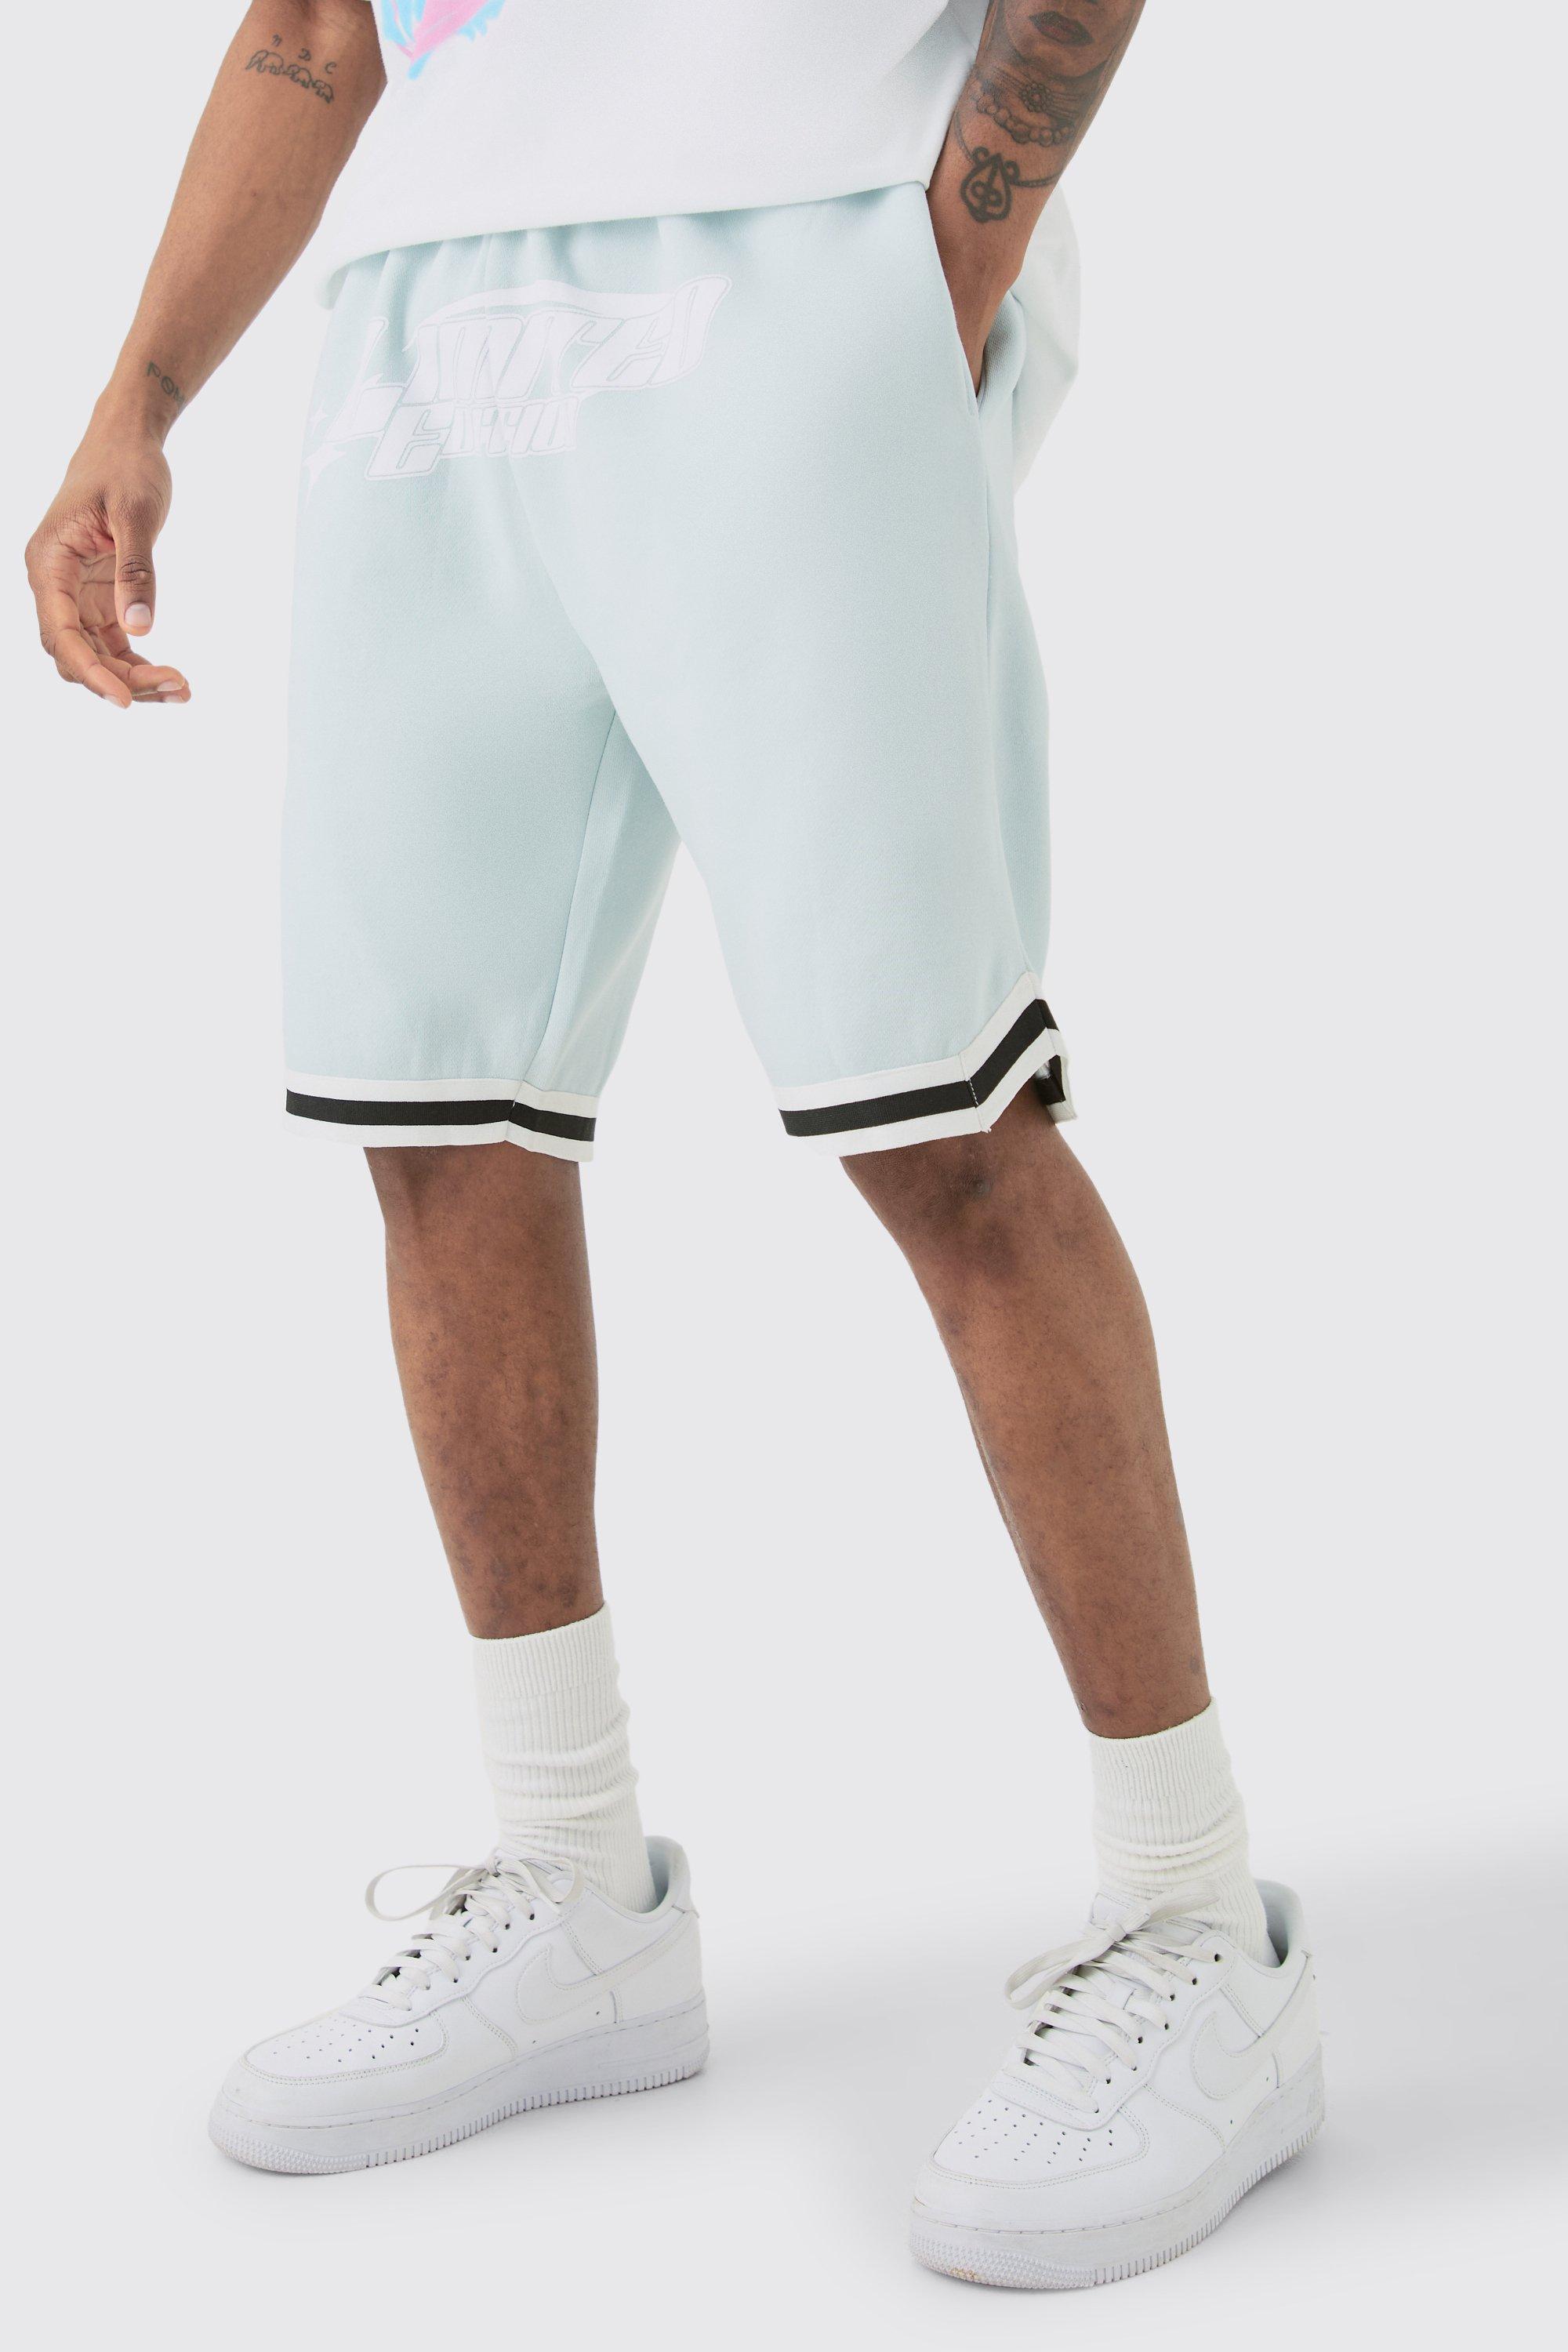 Image of Tall Loose Fit Limited Edition Basketball Short In Lt Blue, Azzurro